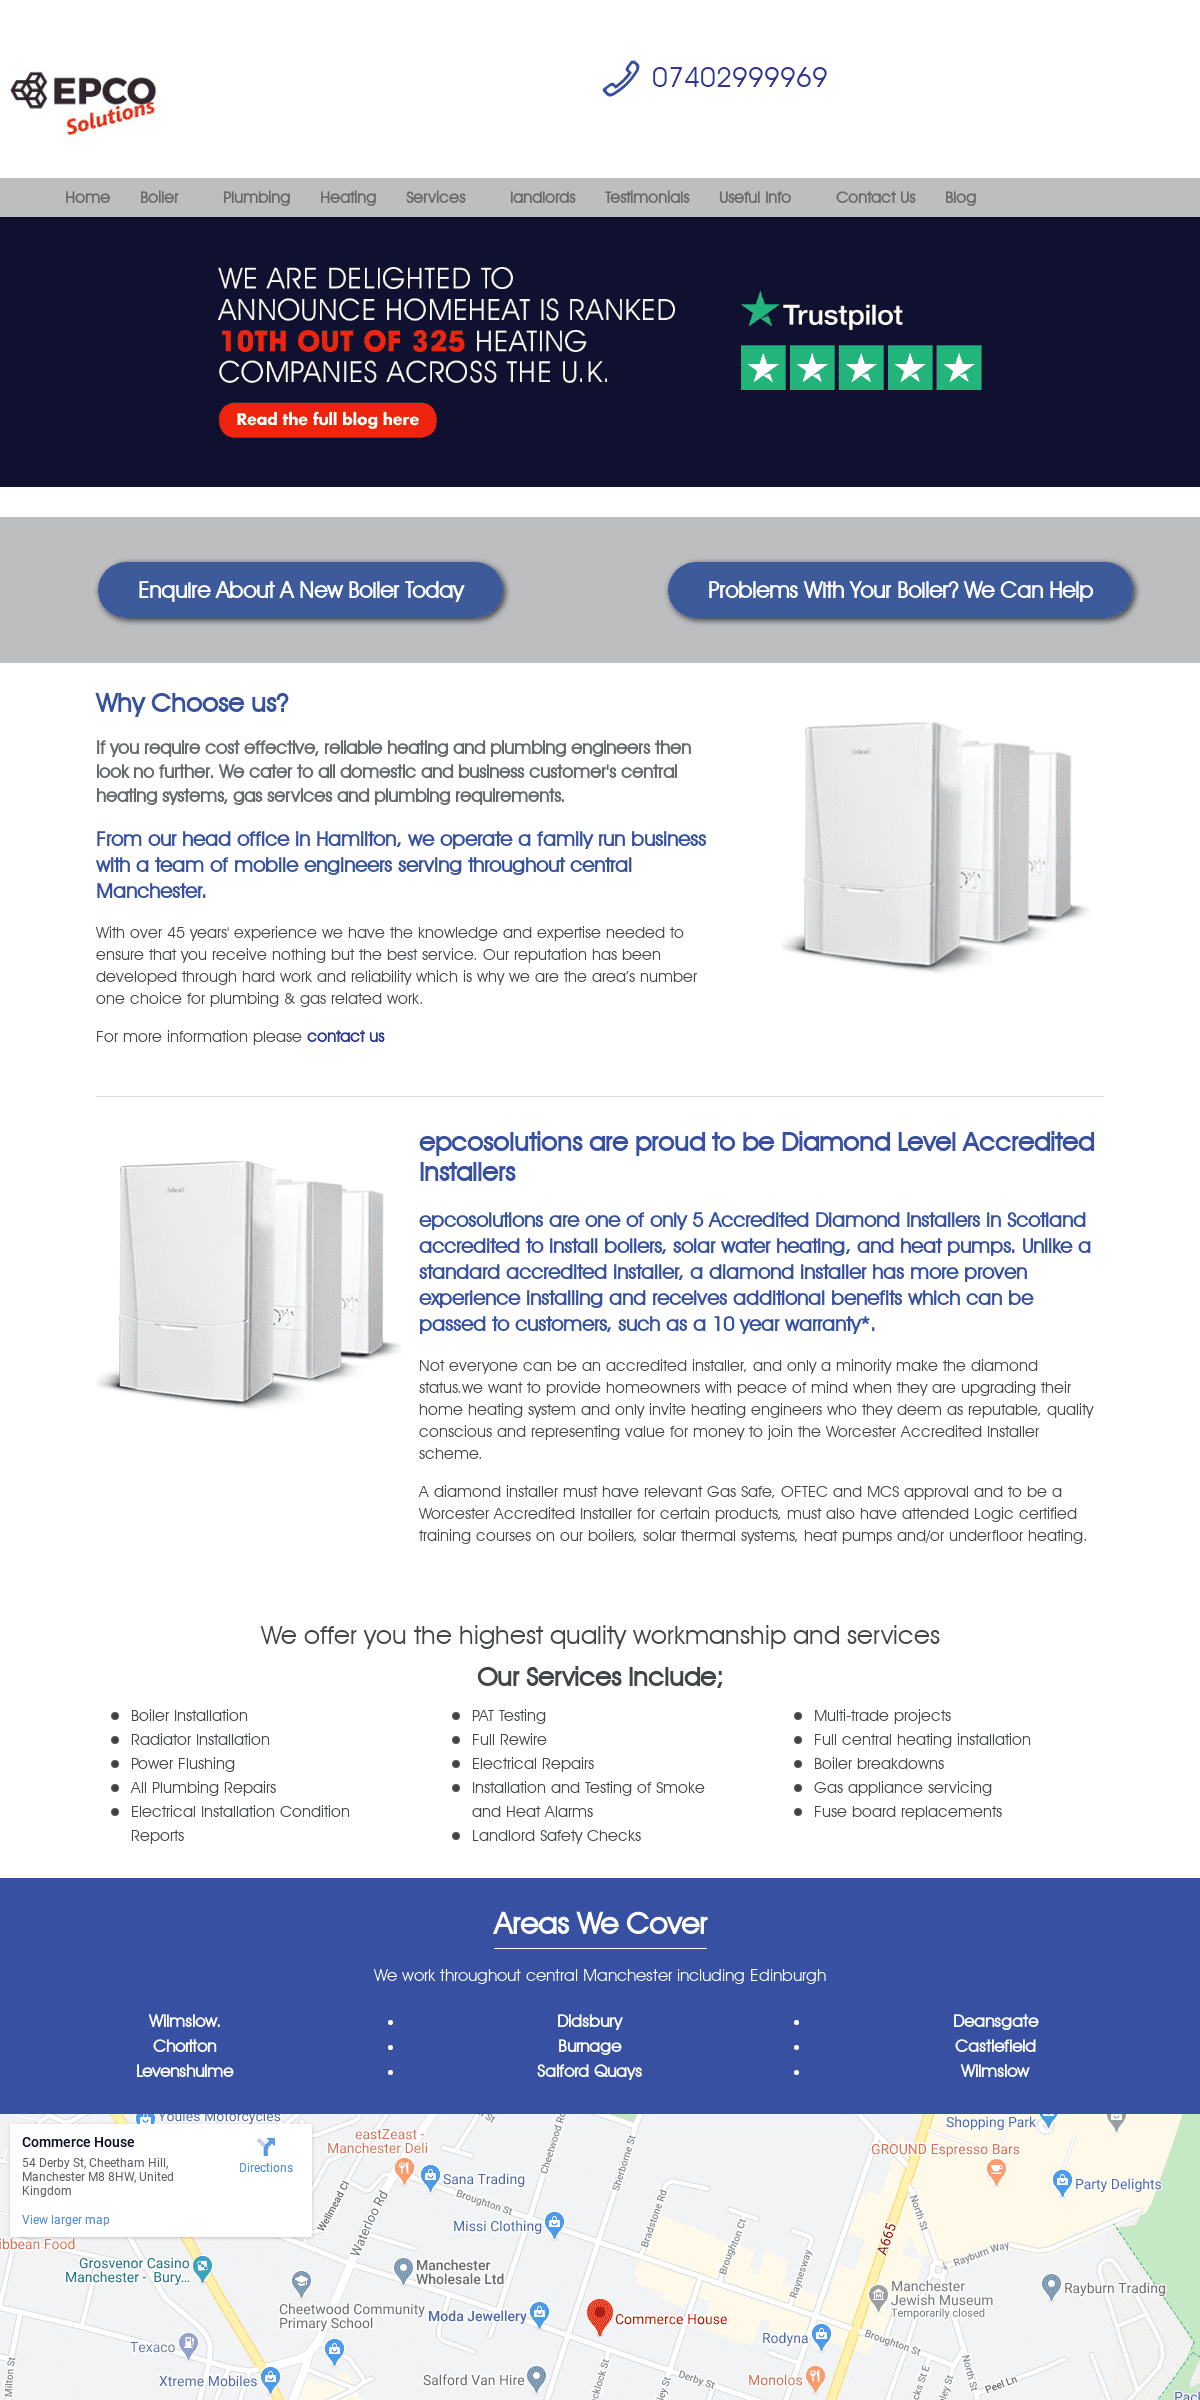 A complete backup of epcosolutions.co.uk